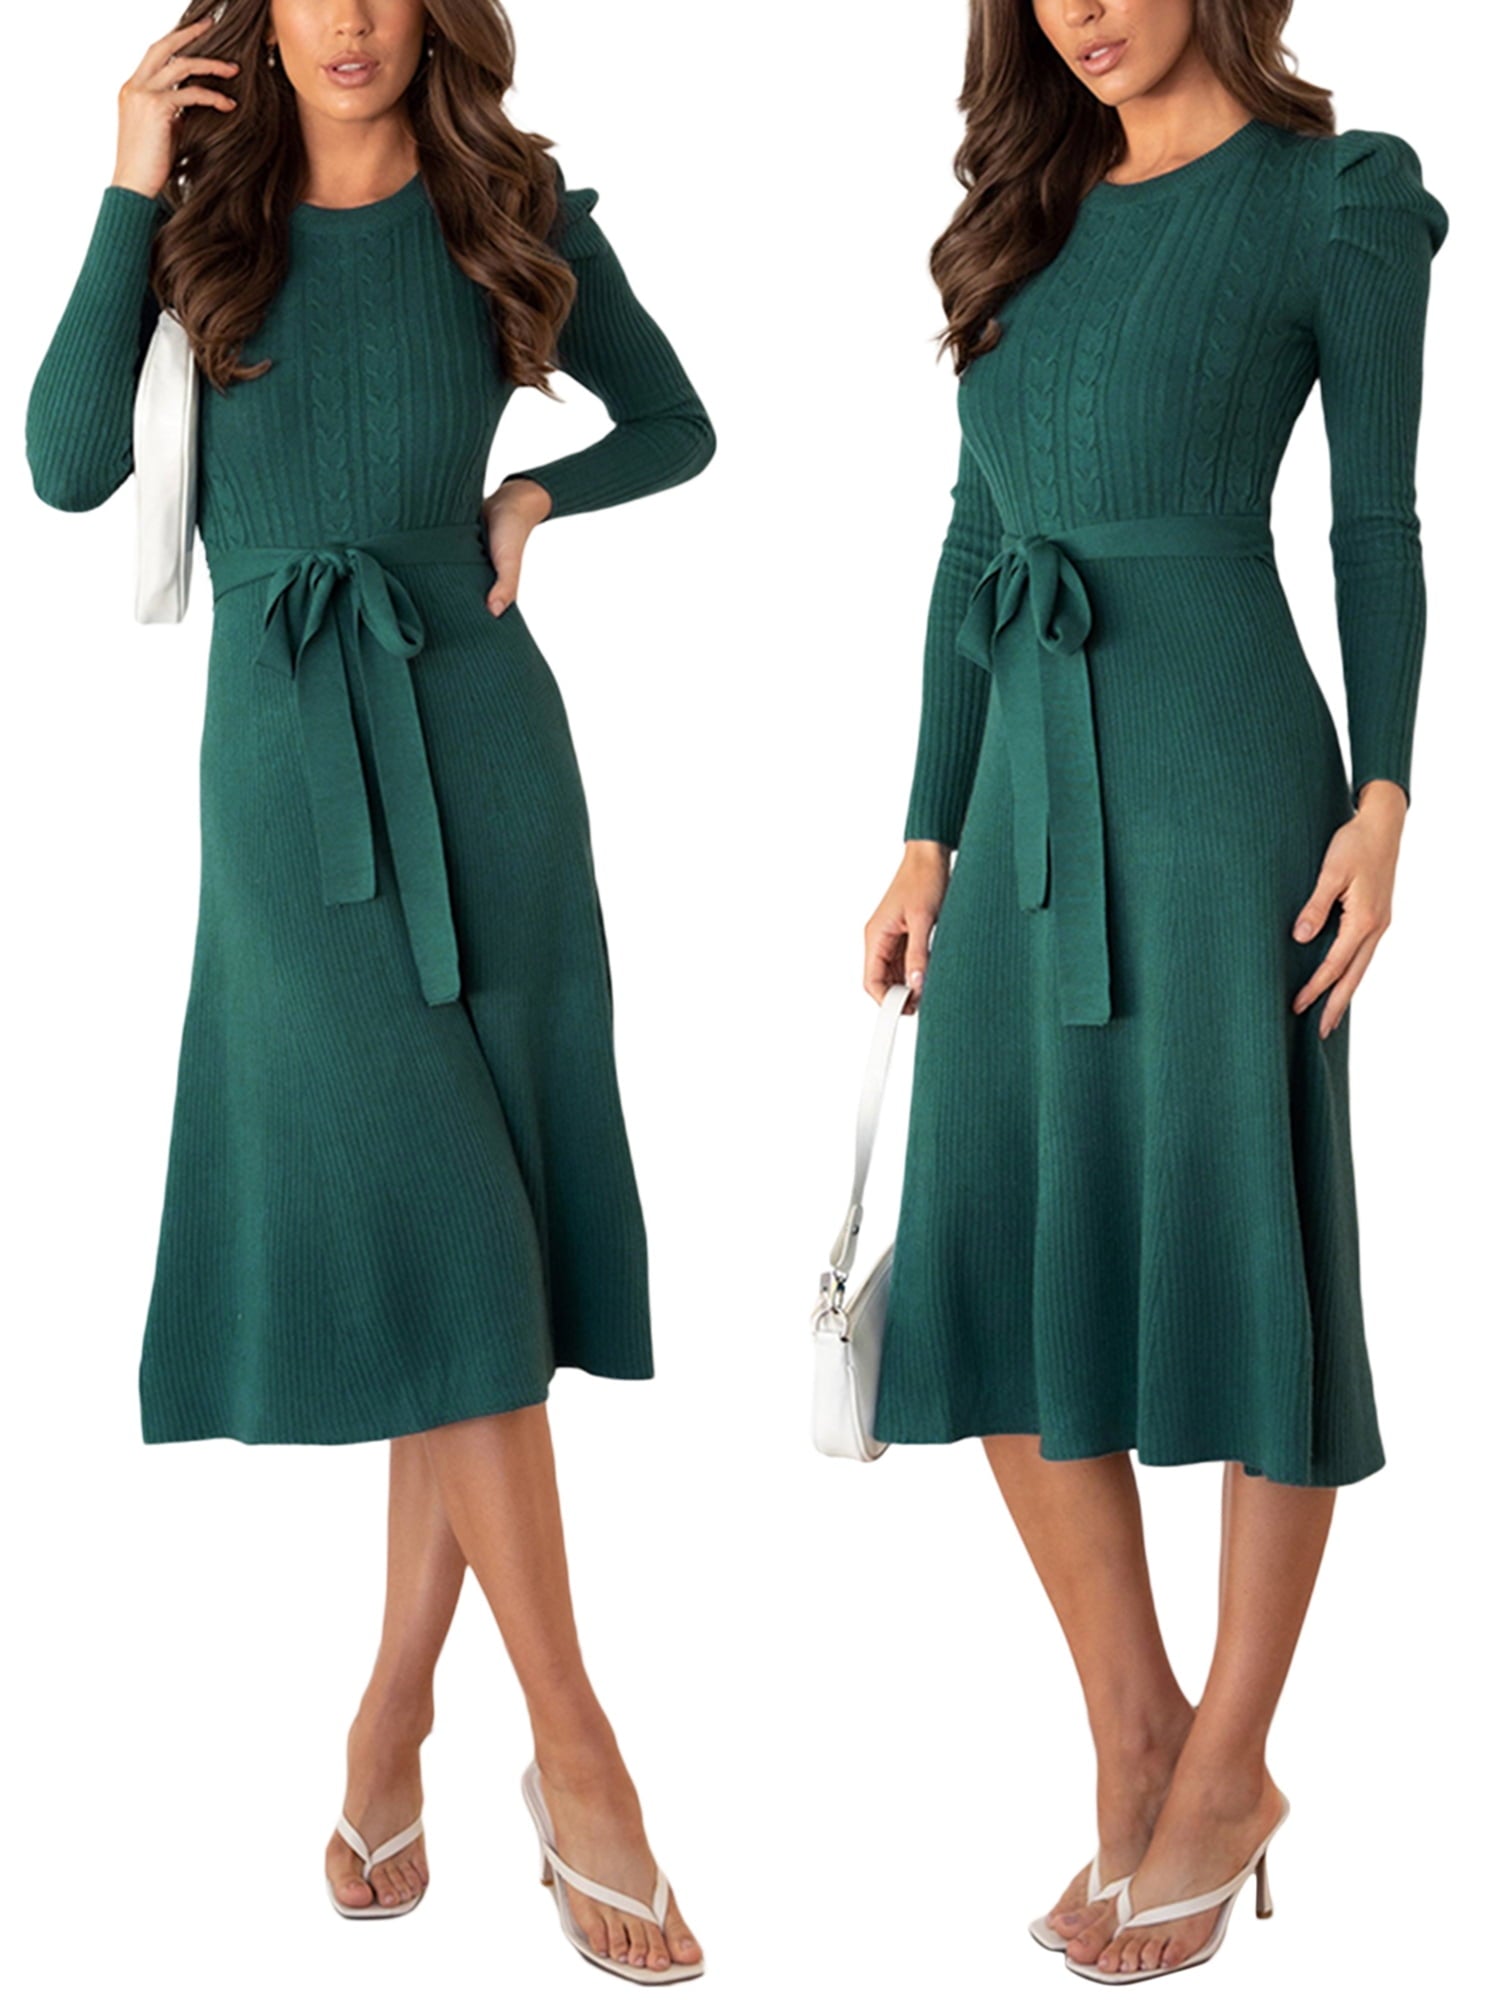 Pudcoco Women Long Sleeve Knit Midi Dress Solid Color Tie Belted Knitted Sweater Dress A-Line Midi Dresses - image 7 of 7